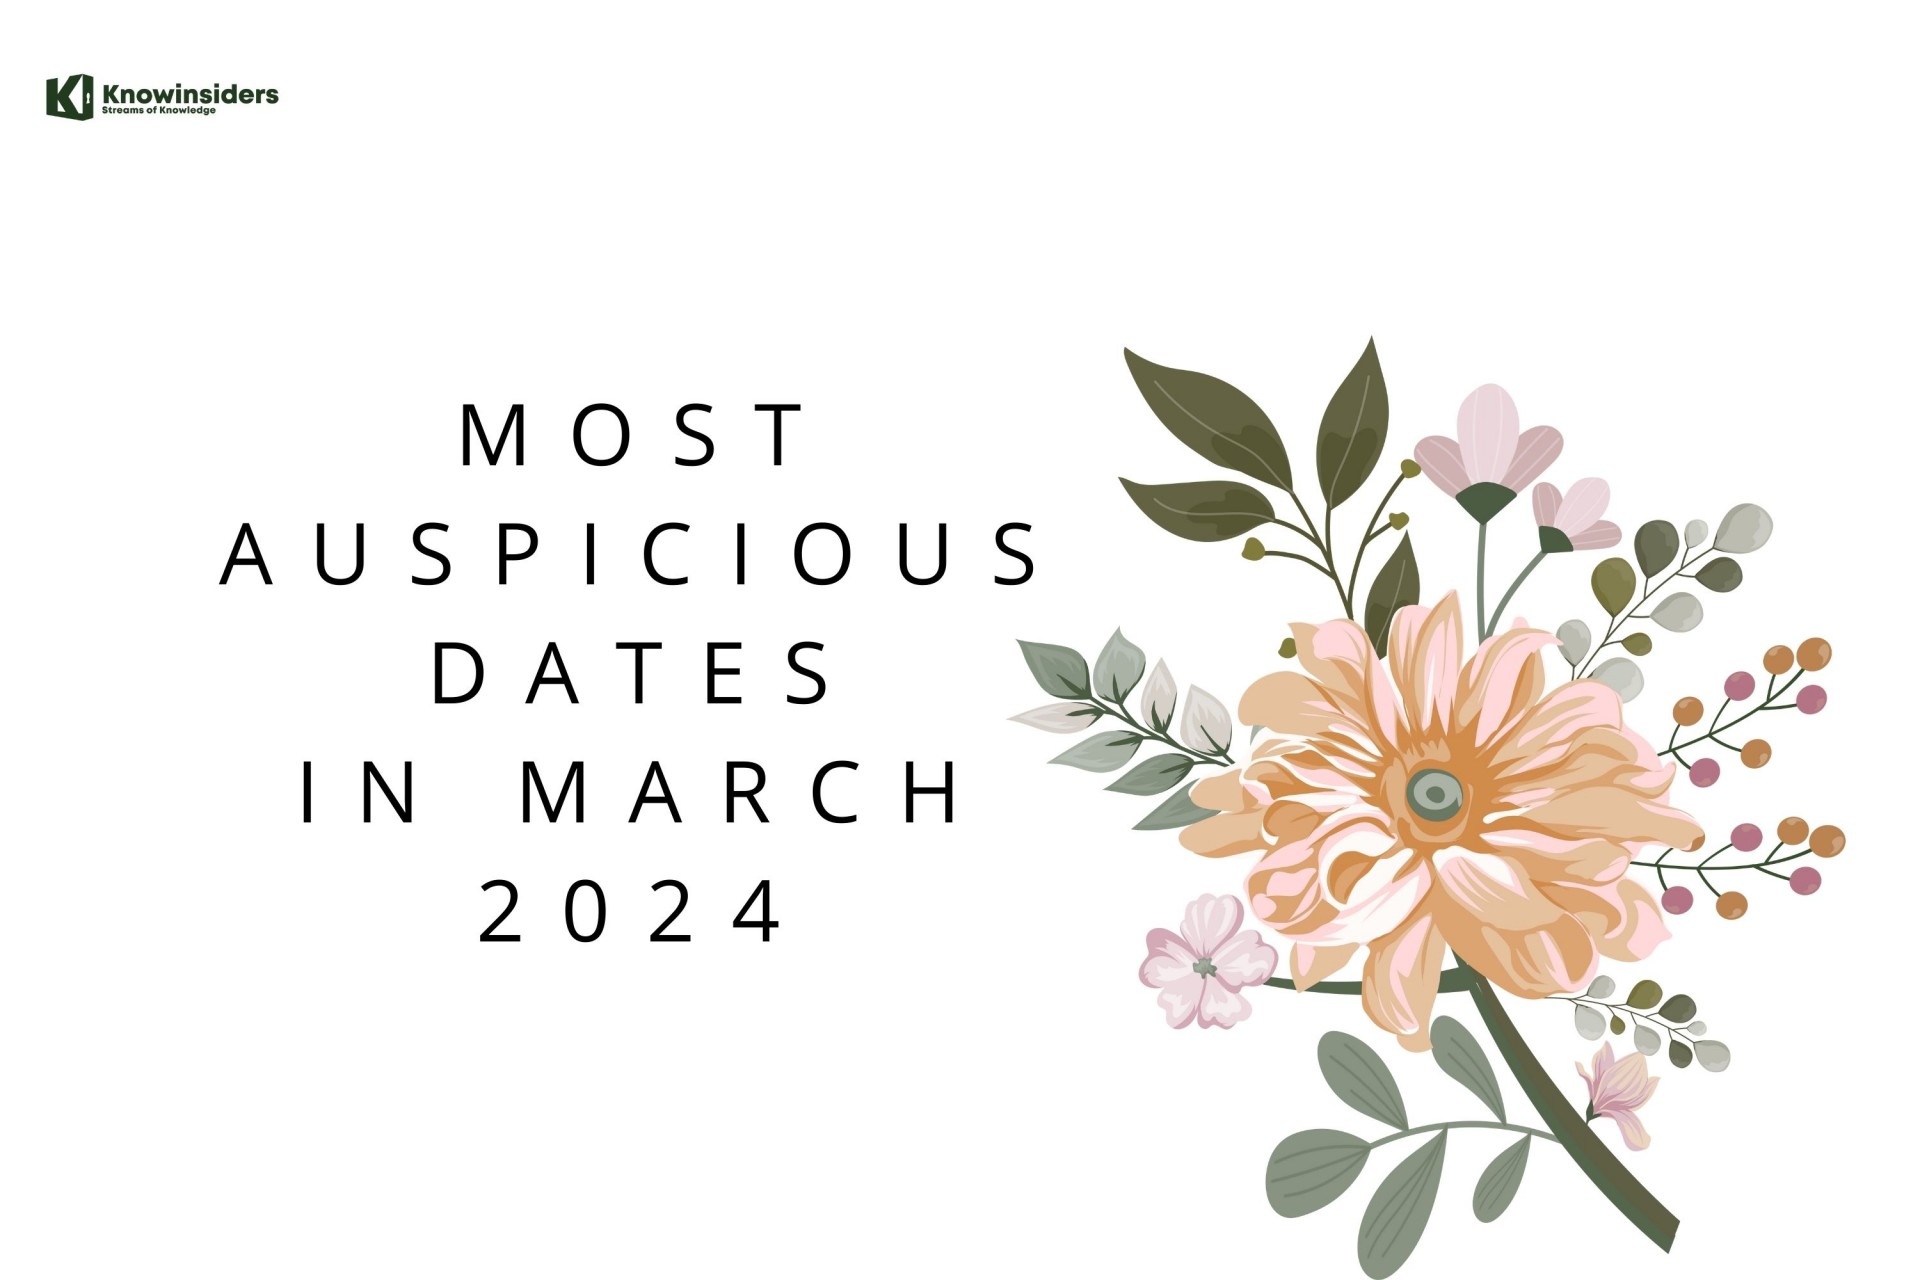 Most Auspicious Dates In March 2024 For Everything By Chinese Calendar: Opening, Wedding, C-sections And More